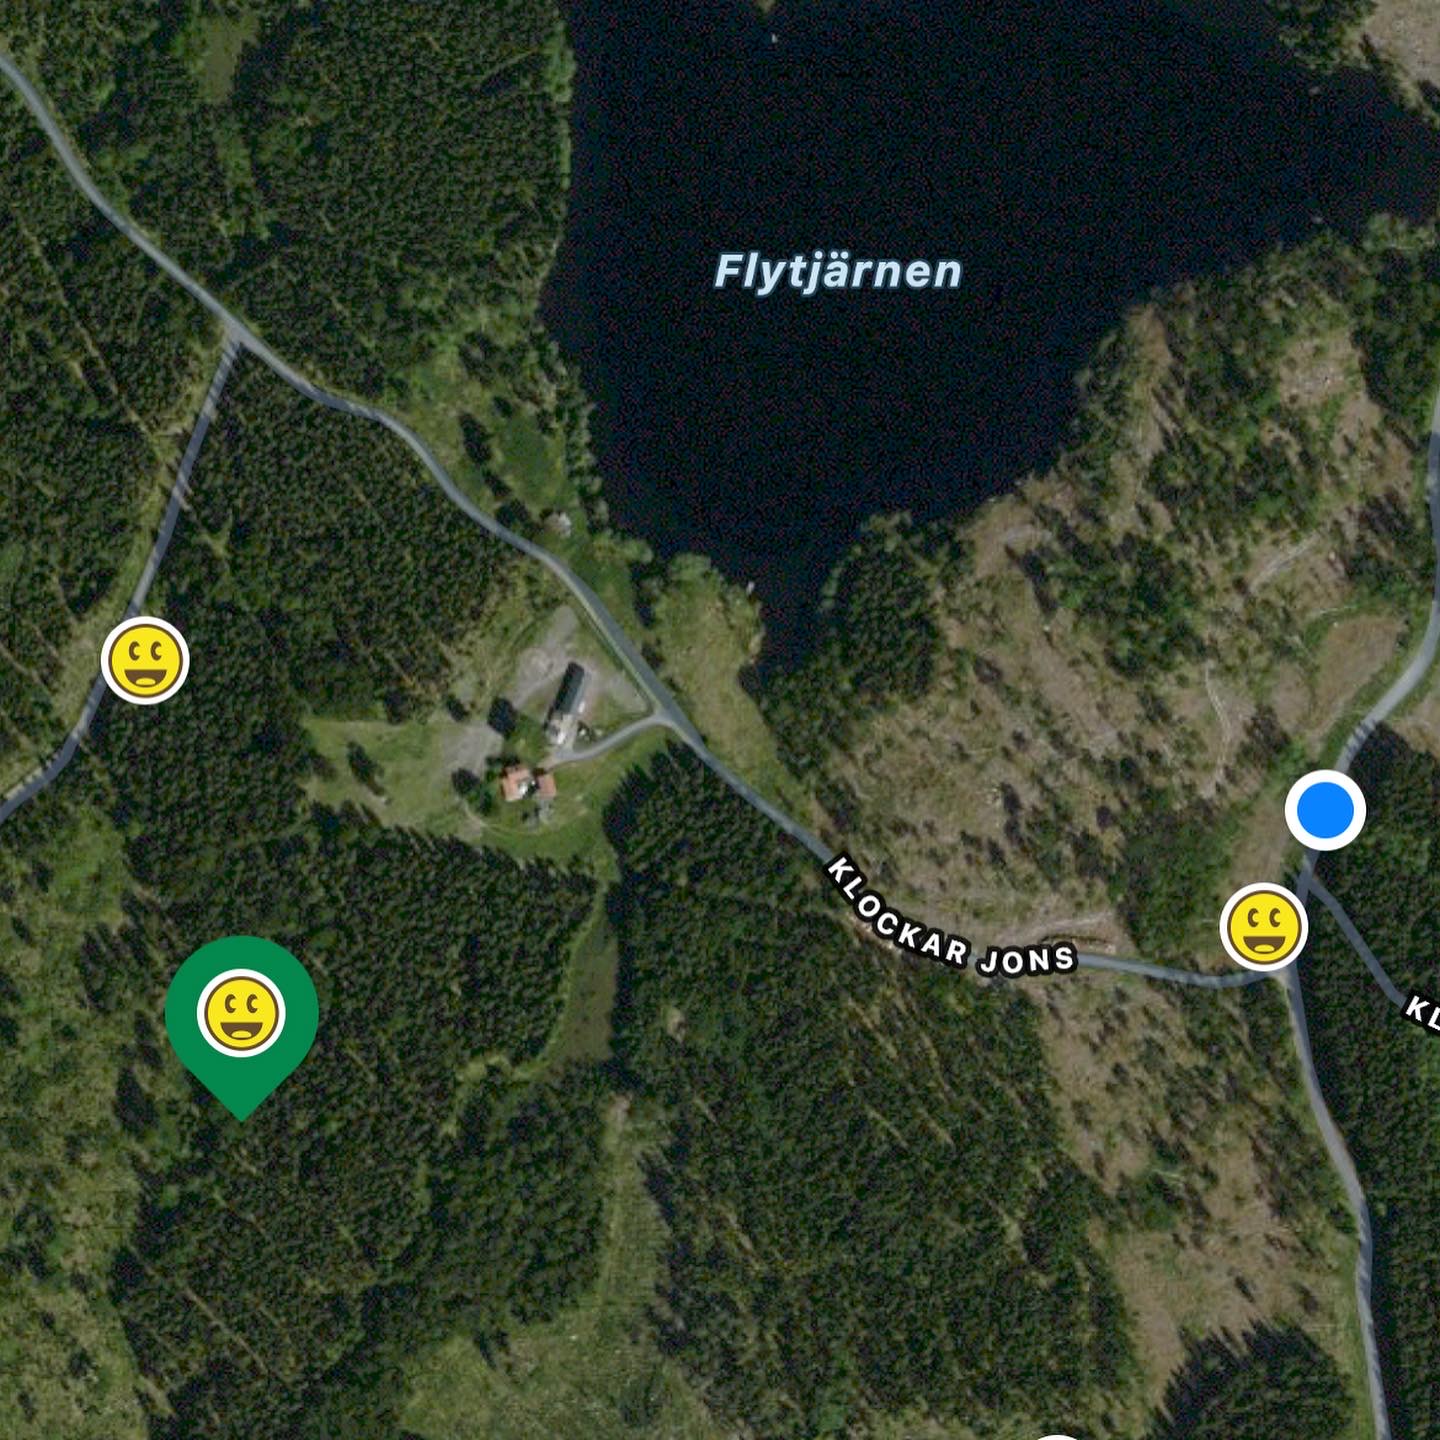 geocaching with dogs in Dalarna Sweden, hiking with dogs, outdoor dog activities, www.DOGvision.eu